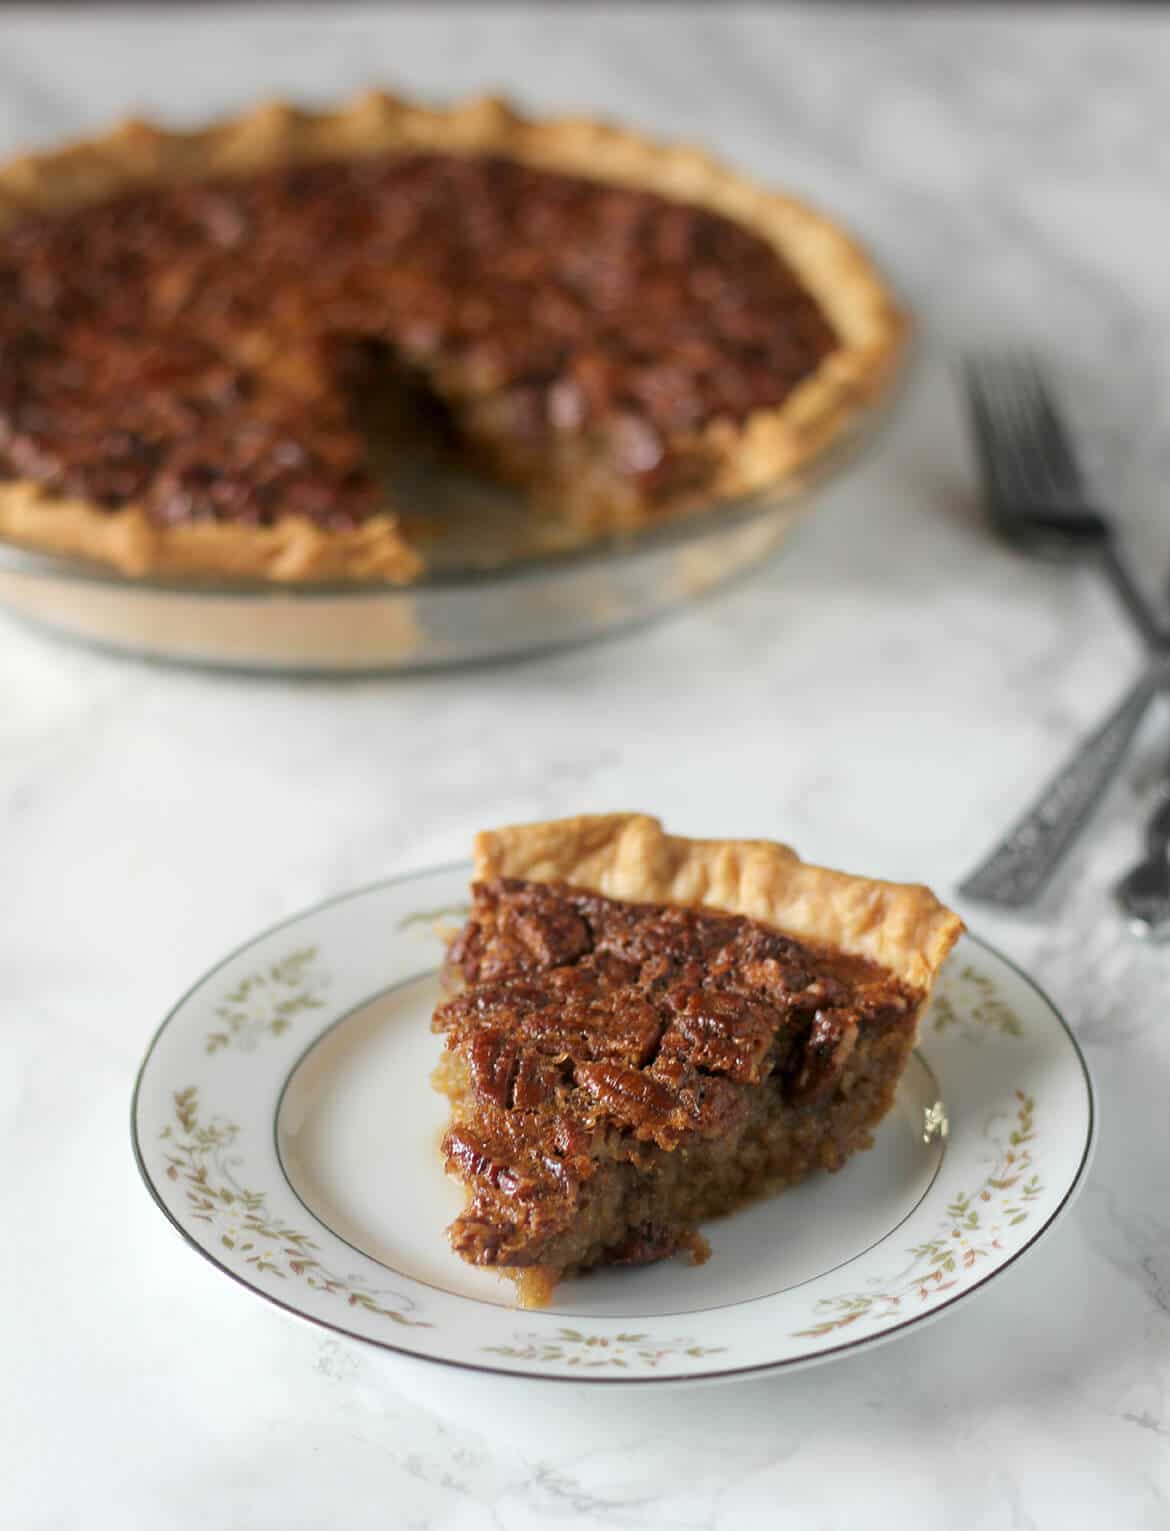 This Southern Pecan Pie recipe is a classic but swaps old-fashioned cane syrup for some of the corn syrup. The result is intense and delicious flavor, not just overwhelming sweetness! 